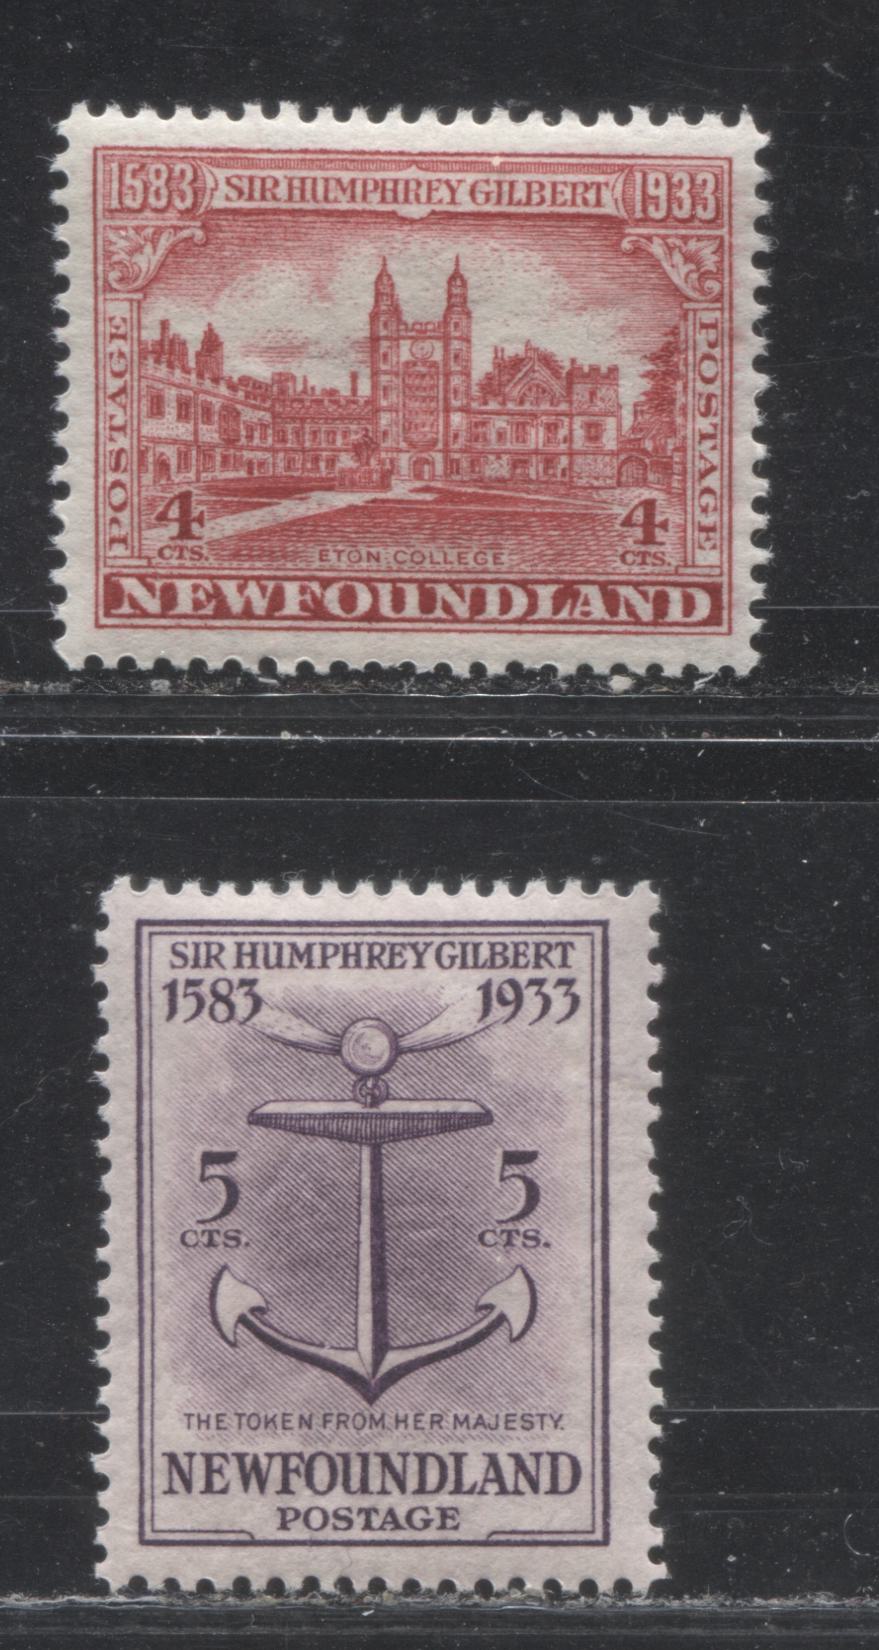 Lot 108 Newfoundland # 215-216 4c & 5c Rose Red & Deep Rose Lilac Eton College & Royal Token, 1933 Sir Humphrey Gilbert Issue, Two VFNH Examples, Various Comb Perfs